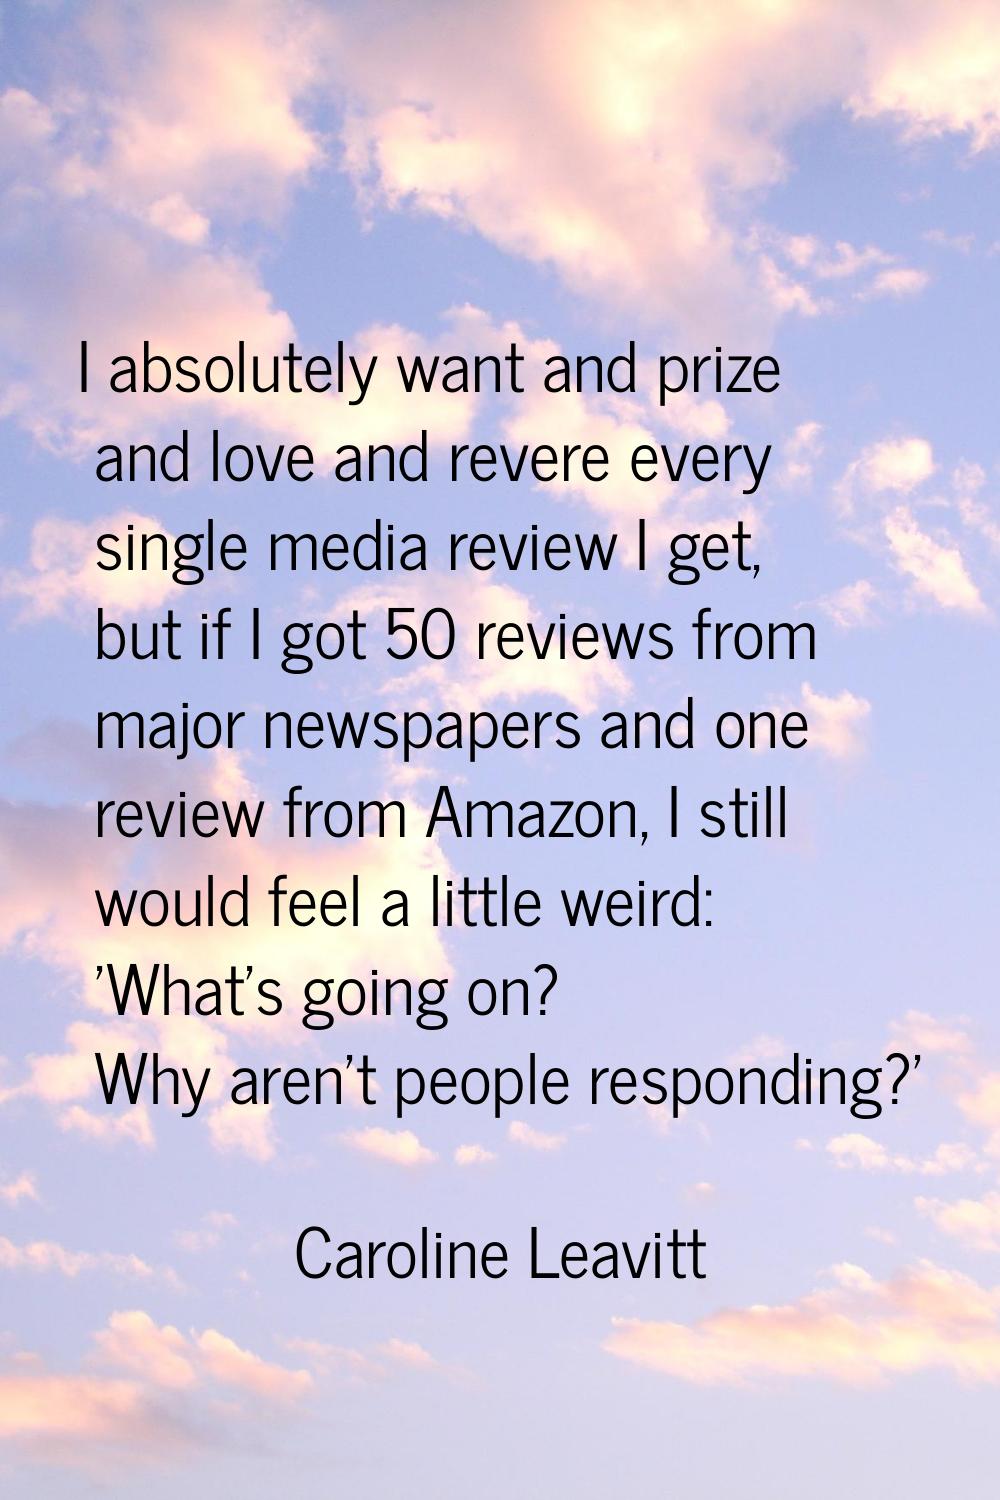 I absolutely want and prize and love and revere every single media review I get, but if I got 50 re